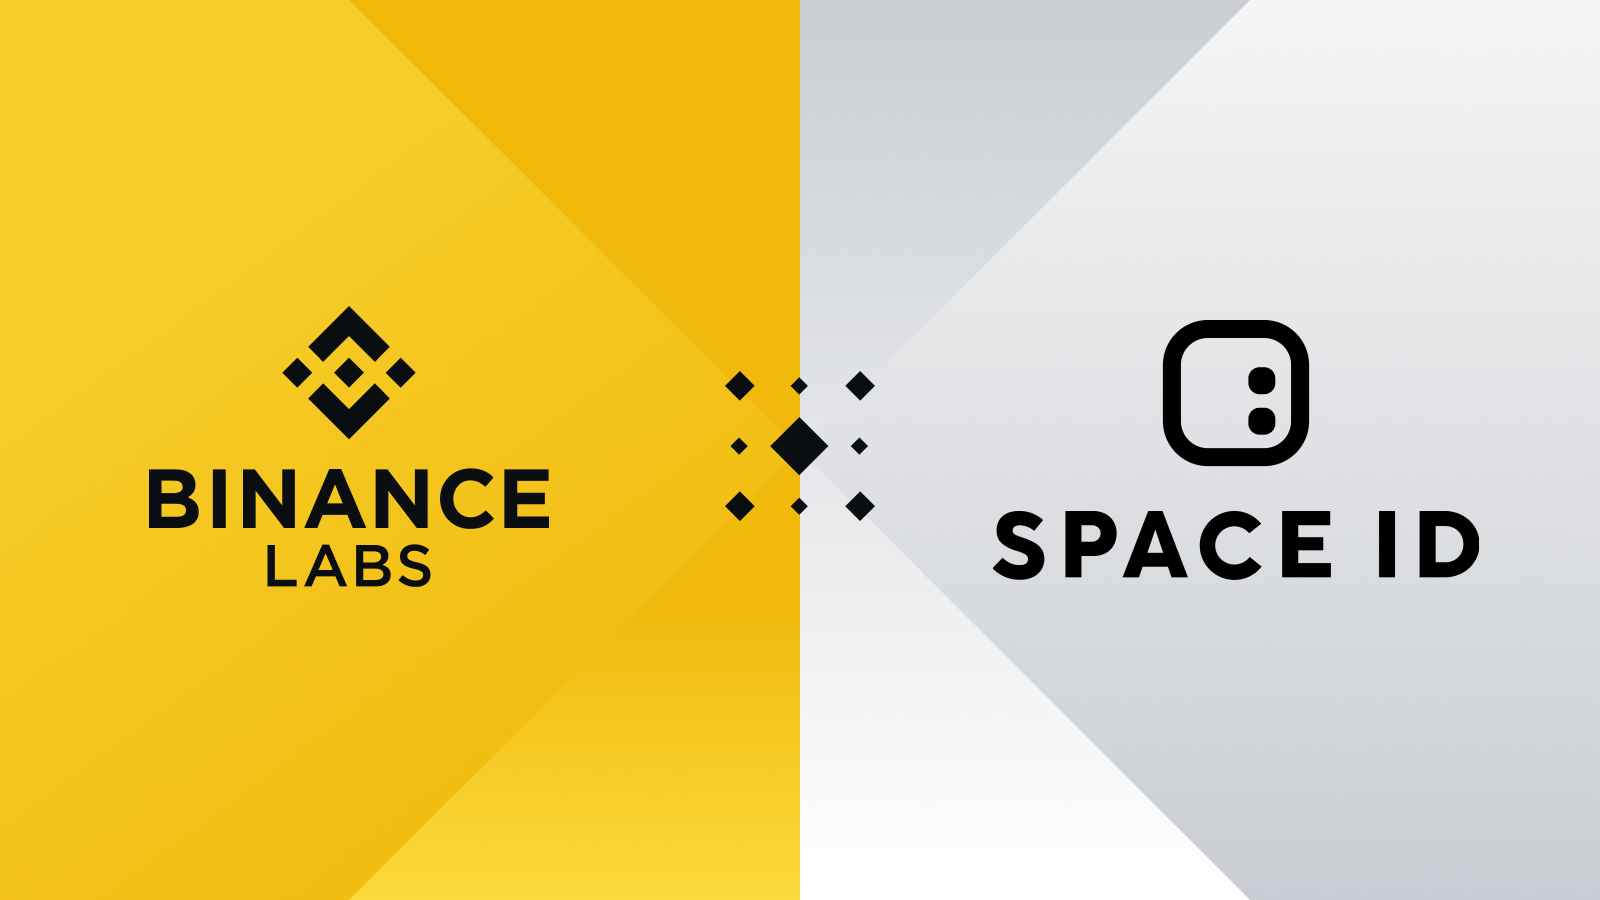 .BNB domain name｜Binance led the investment in SPACE ID seed round financing; the address transaction volume exceeded 1.3 million magnesium